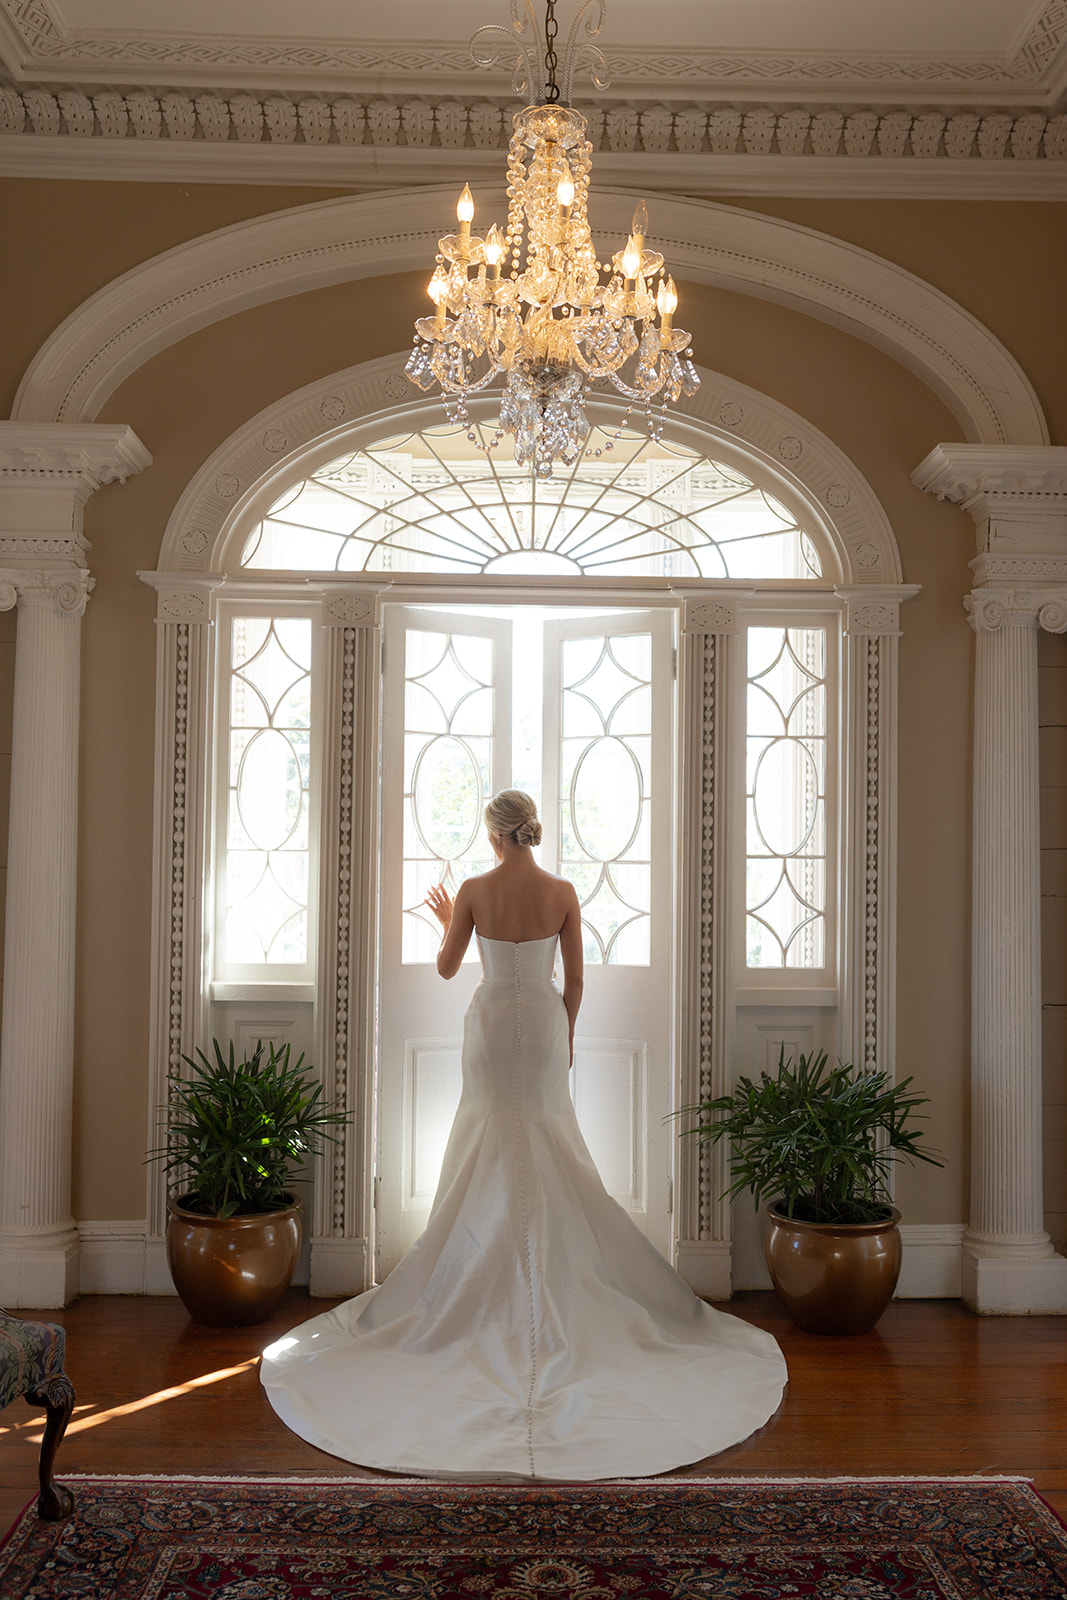 Bride standing in front of ornamental door and window at gov. thomas Bennett House for photo session to showcase wedding dress in Charleston